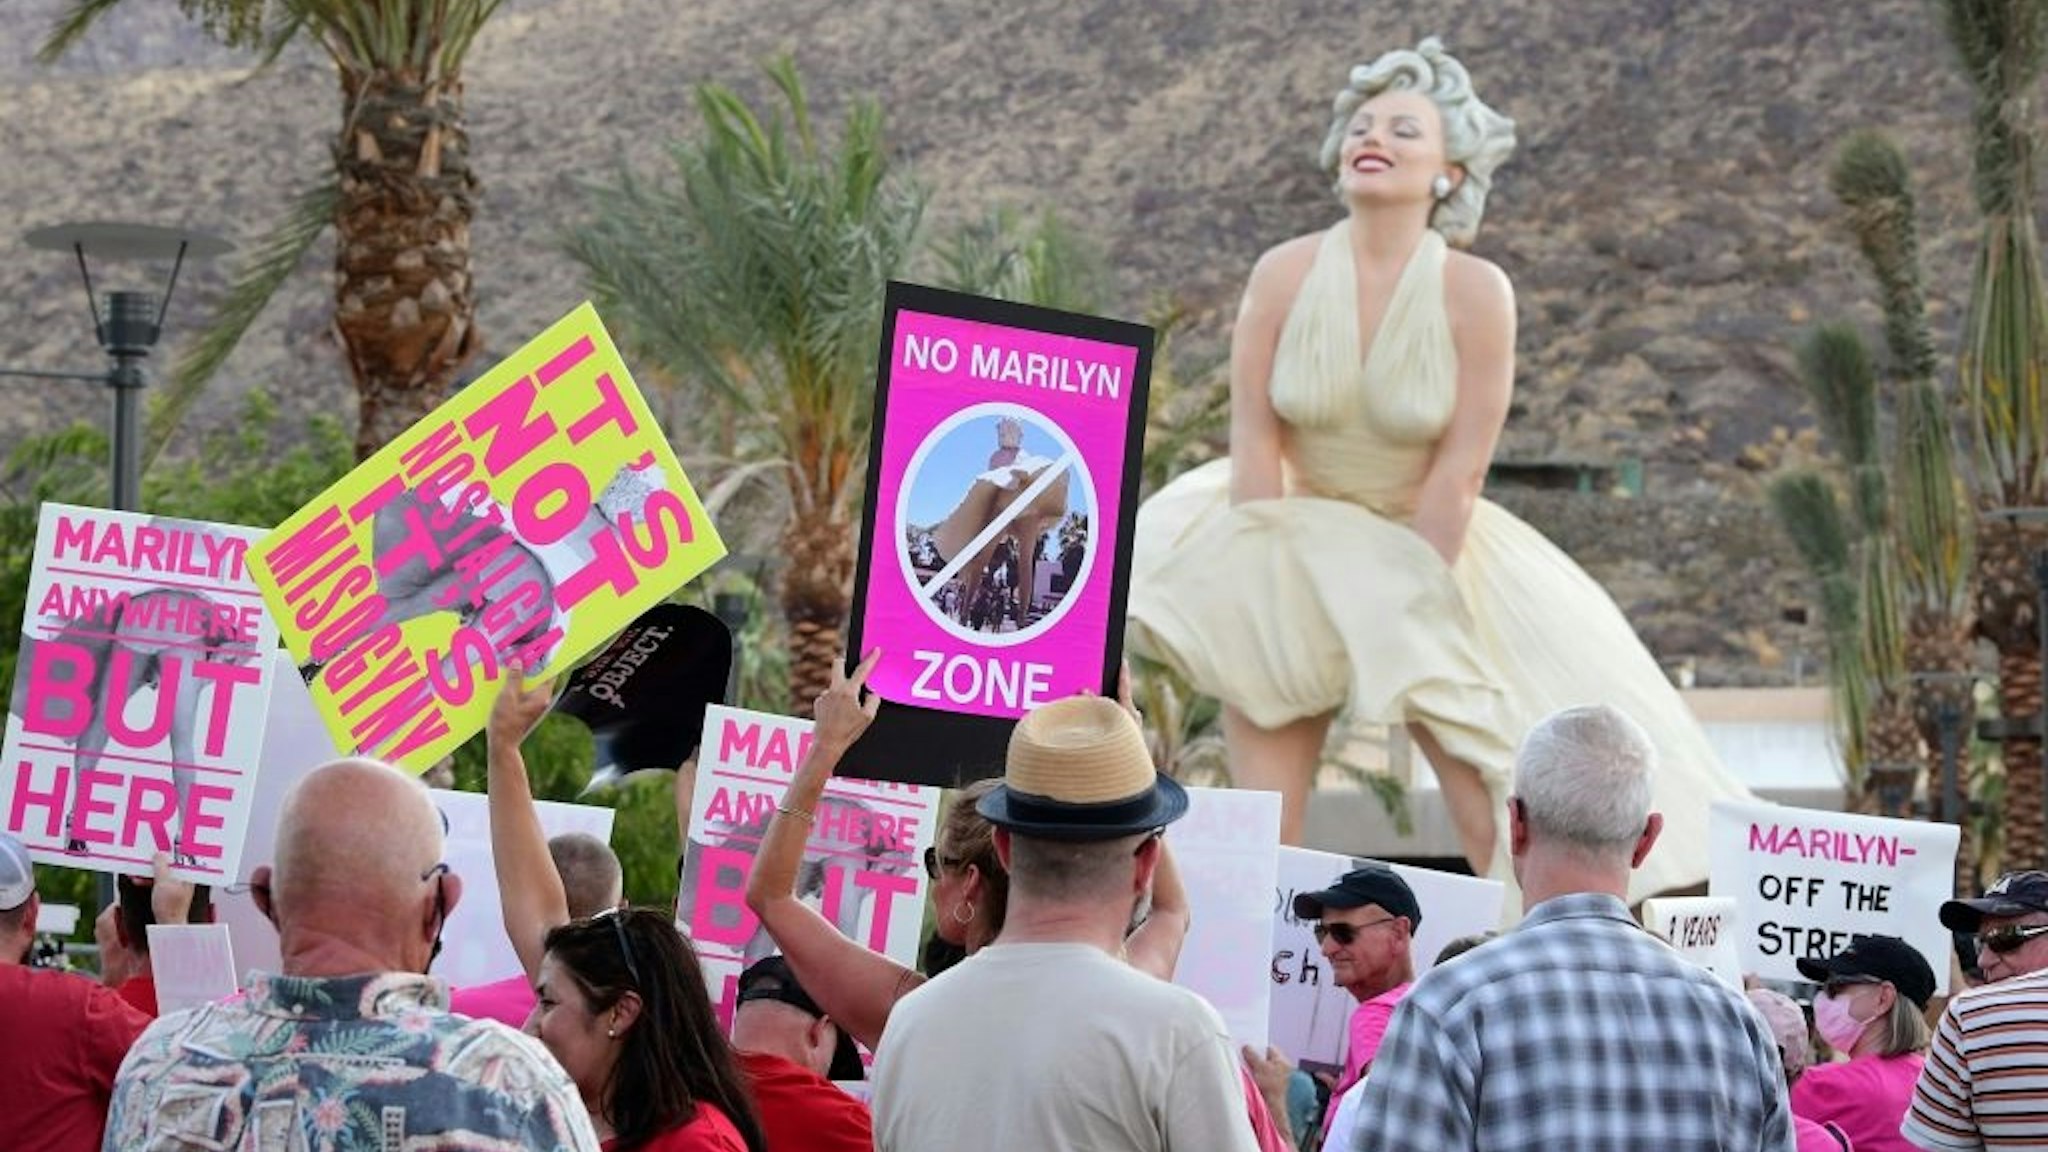 Protesters gather in front of the "Forever Marilyn" statue unveiled today on its return to Palm Springs, California on June 20, 2021.